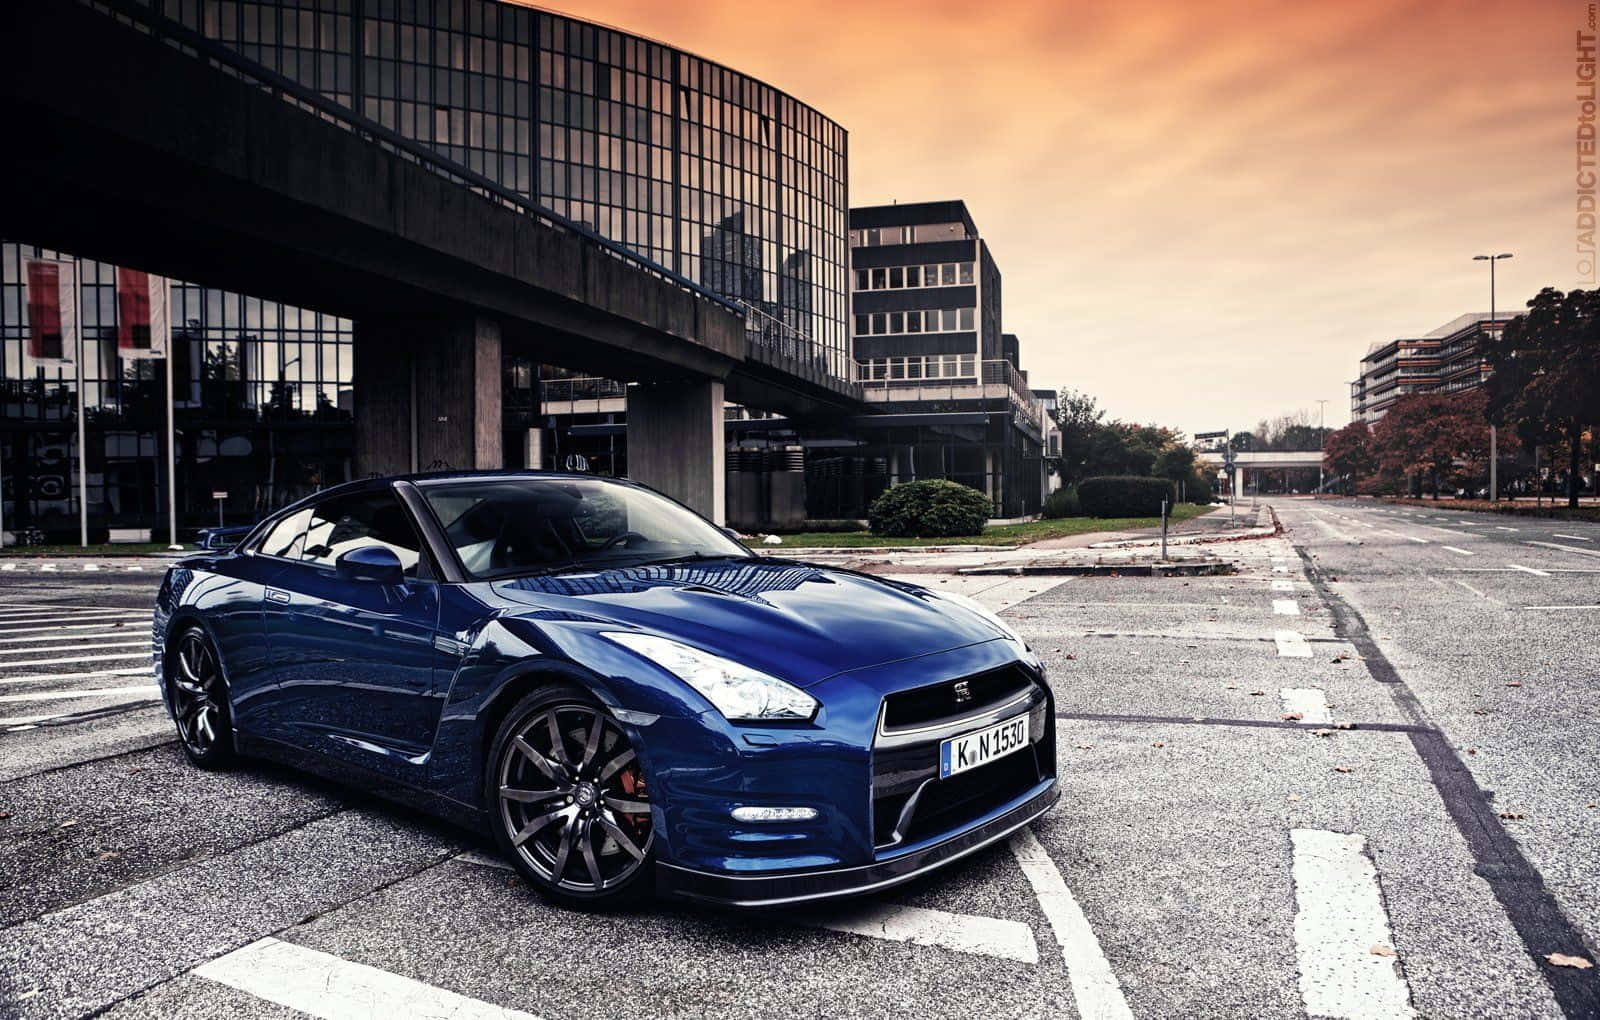 Cool Gtr With A Stylish Fire Red Finish Wallpaper